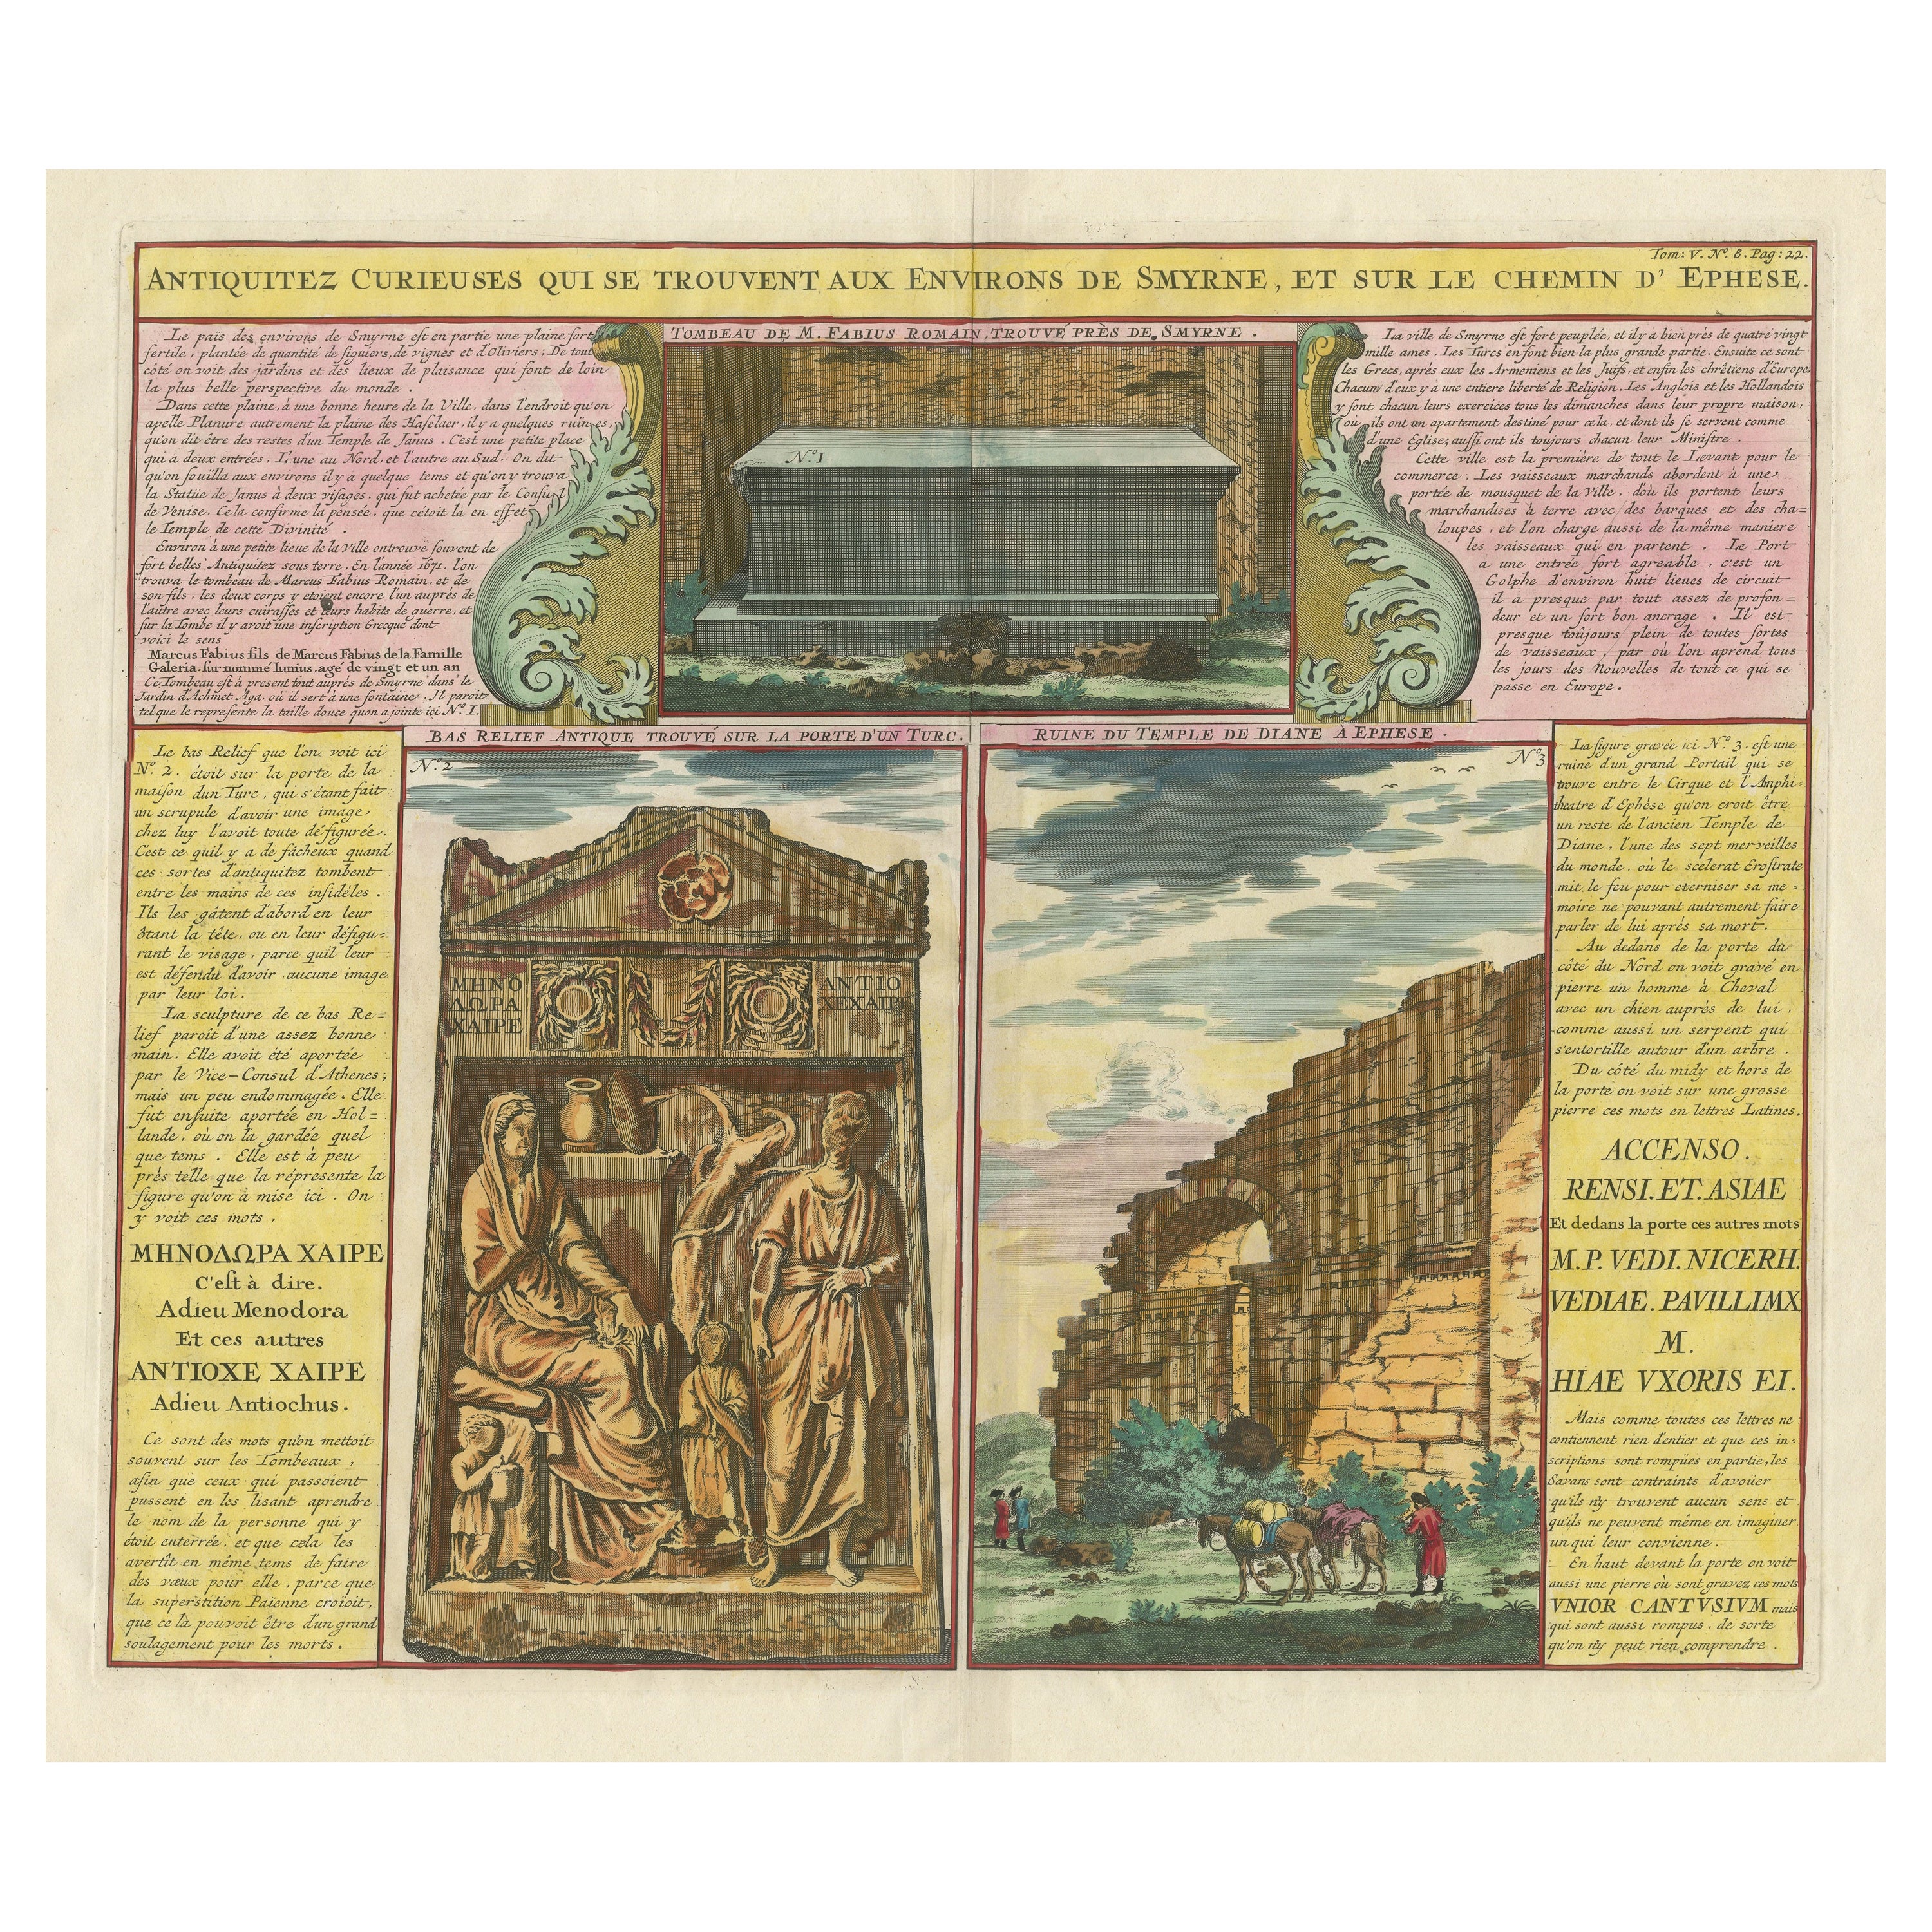 Antique Print showing Monuments in Ephesus, present-day Izmir province, Turkey For Sale